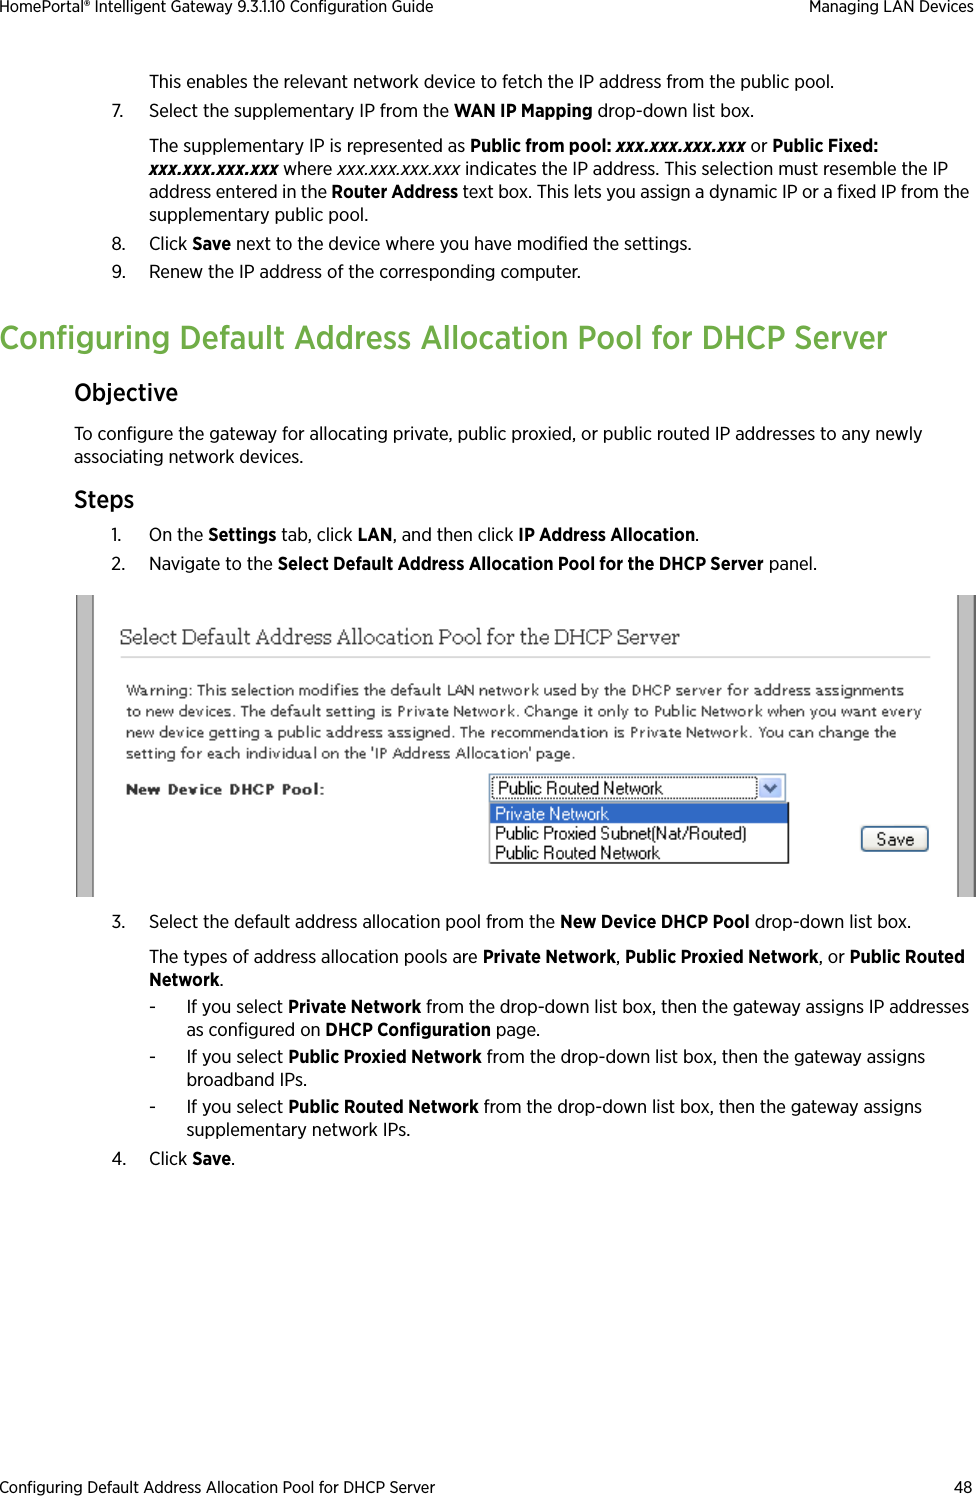 Configuring Default Address Allocation Pool for DHCP Server 48HomePortal® Intelligent Gateway 9.3.1.10 Configuration Guide Managing LAN DevicesThis enables the relevant network device to fetch the IP address from the public pool.7. Select the supplementary IP from the WAN IP Mapping drop-down list box.The supplementary IP is represented as Public from pool: xxx.xxx.xxx.xxx or Public Fixed: xxx.xxx.xxx.xxx where xxx.xxx.xxx.xxx indicates the IP address. This selection must resemble the IP address entered in the Router Address text box. This lets you assign a dynamic IP or a fixed IP from the supplementary public pool.8. Click Save next to the device where you have modified the settings. 9. Renew the IP address of the corresponding computer.Configuring Default Address Allocation Pool for DHCP ServerObjectiveTo configure the gateway for allocating private, public proxied, or public routed IP addresses to any newly associating network devices.Steps1. On the Settings tab, click LAN, and then click IP Address Allocation.2. Navigate to the Select Default Address Allocation Pool for the DHCP Server panel.3. Select the default address allocation pool from the New Device DHCP Pool drop-down list box.The types of address allocation pools are Private Network, Public Proxied Network, or Public Routed Network.-If you select Private Network from the drop-down list box, then the gateway assigns IP addresses as configured on DHCP Configuration page. - If you select Public Proxied Network from the drop-down list box, then the gateway assigns broadband IPs. - If you select Public Routed Network from the drop-down list box, then the gateway assigns supplementary network IPs.4. Click Save.